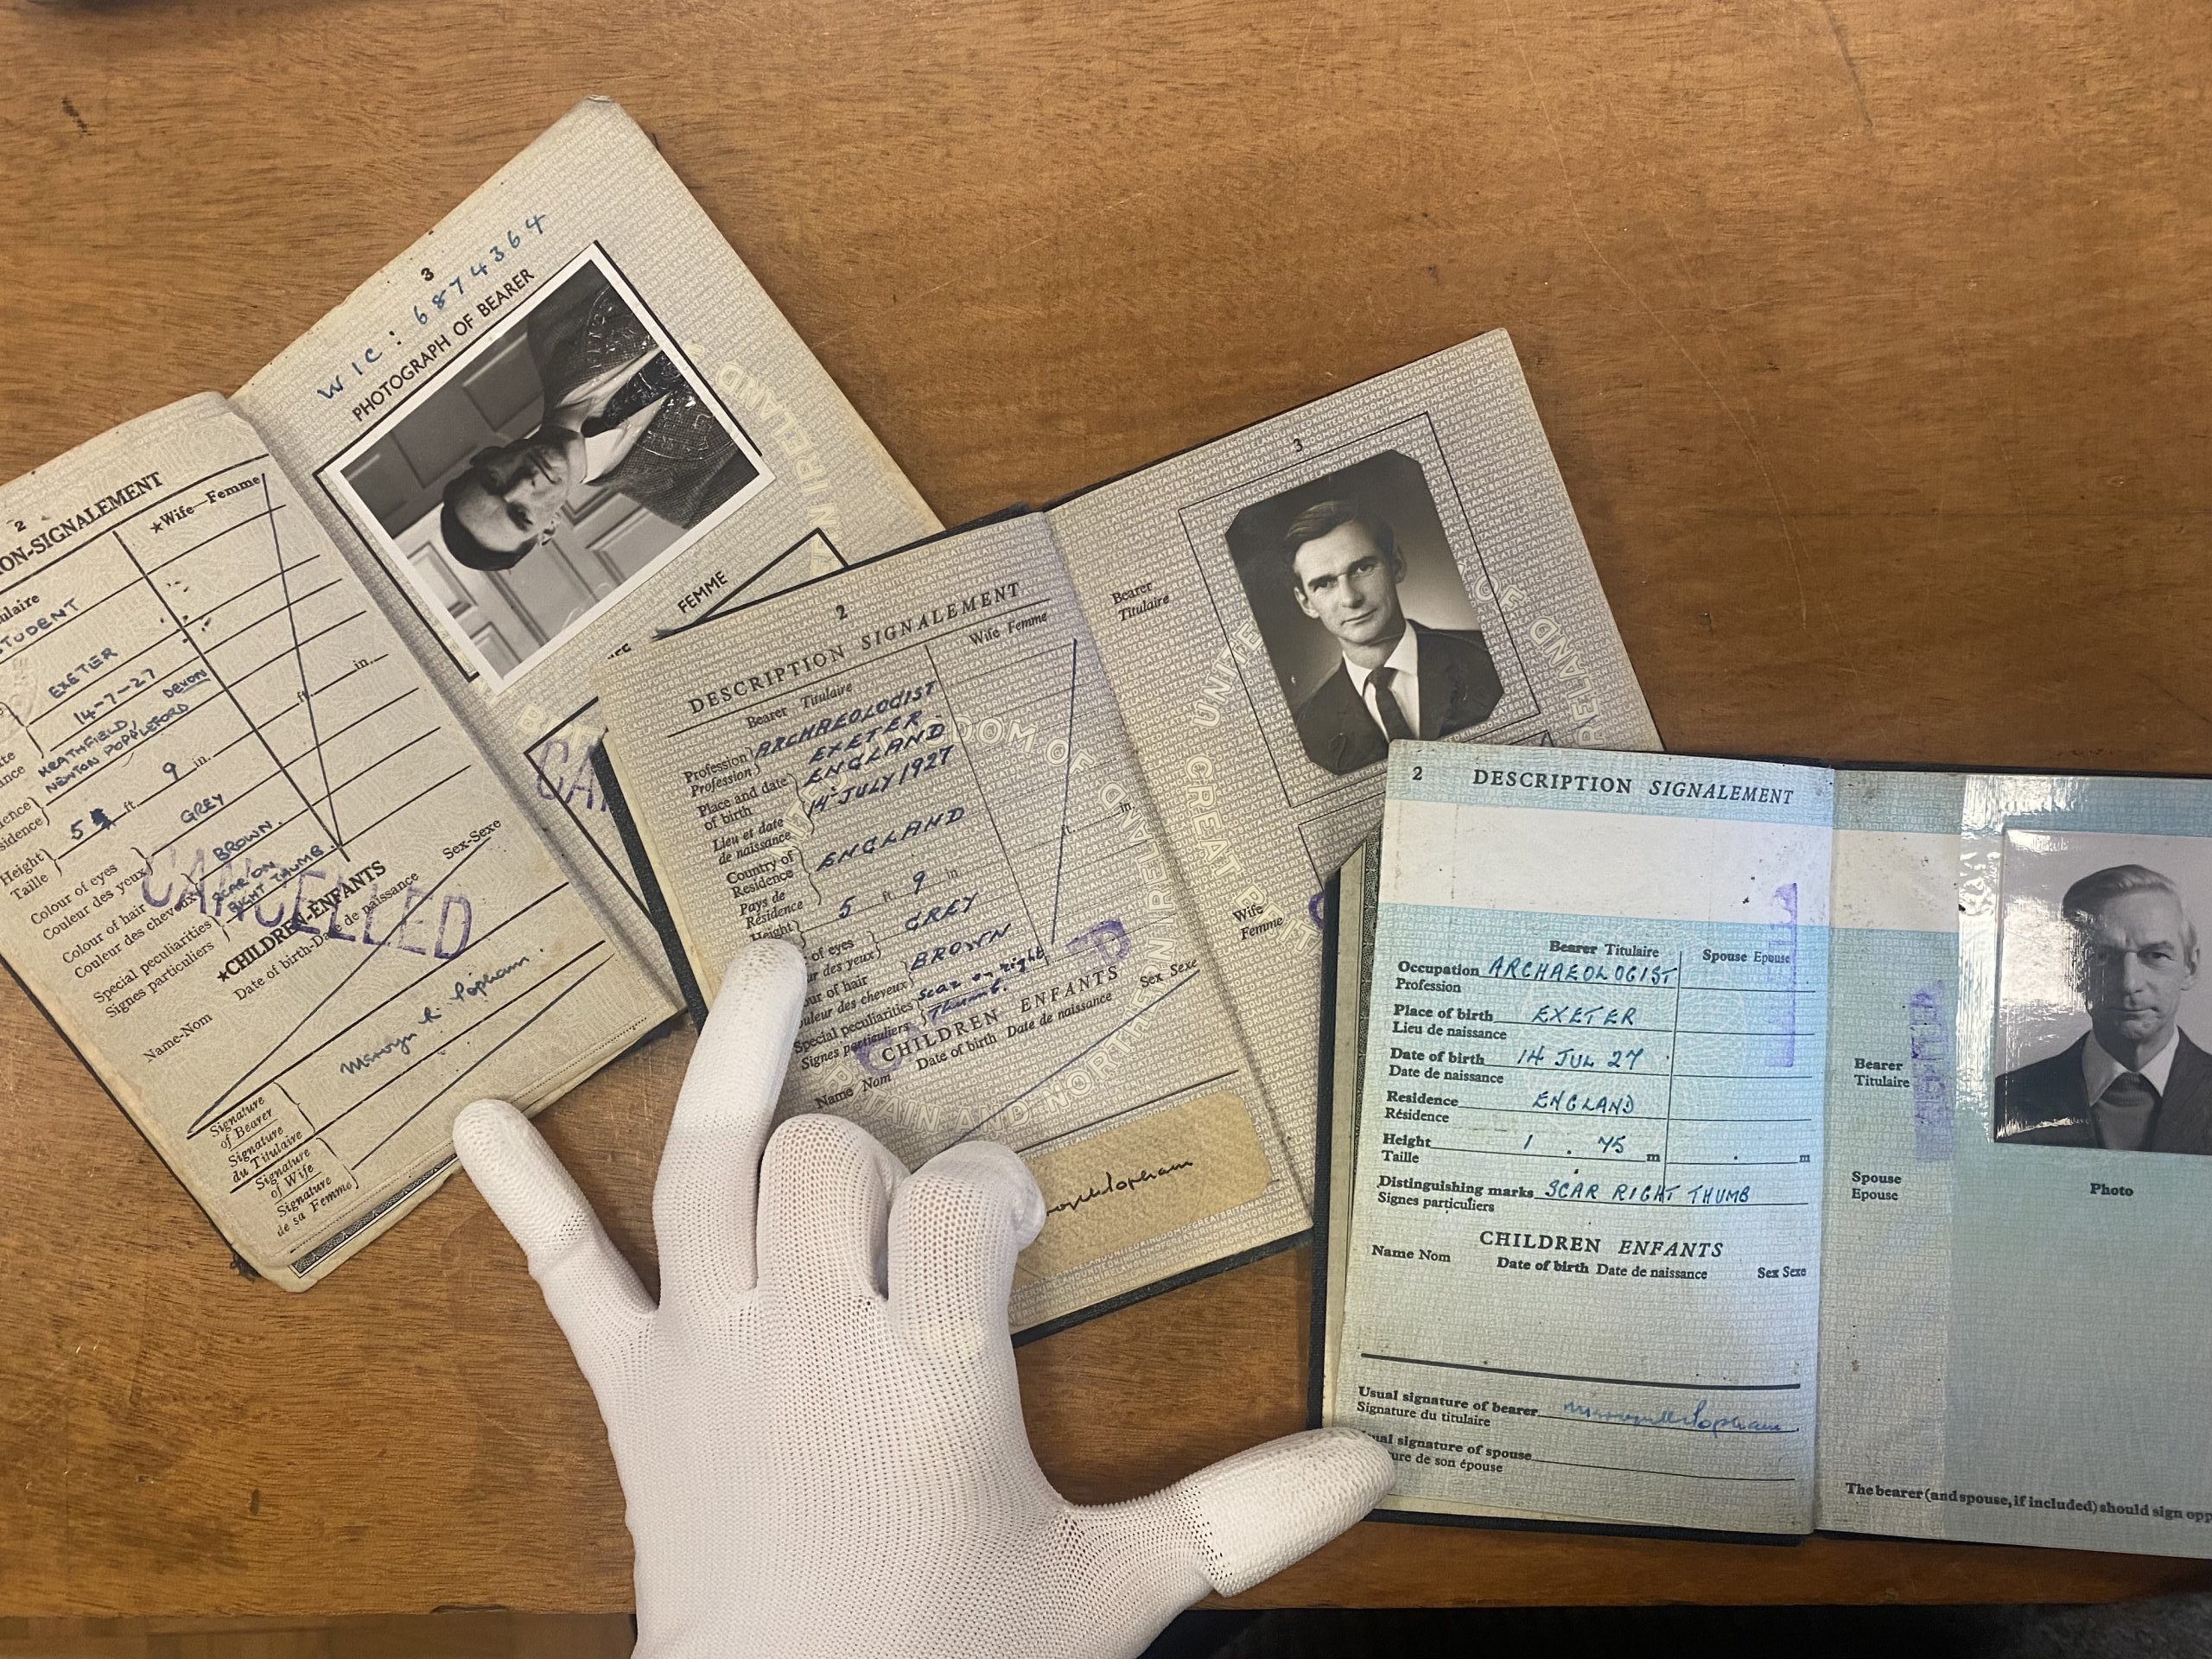 Creating order: first steps in the archival arrangement of the Mervyn R. Popham Personal Papers